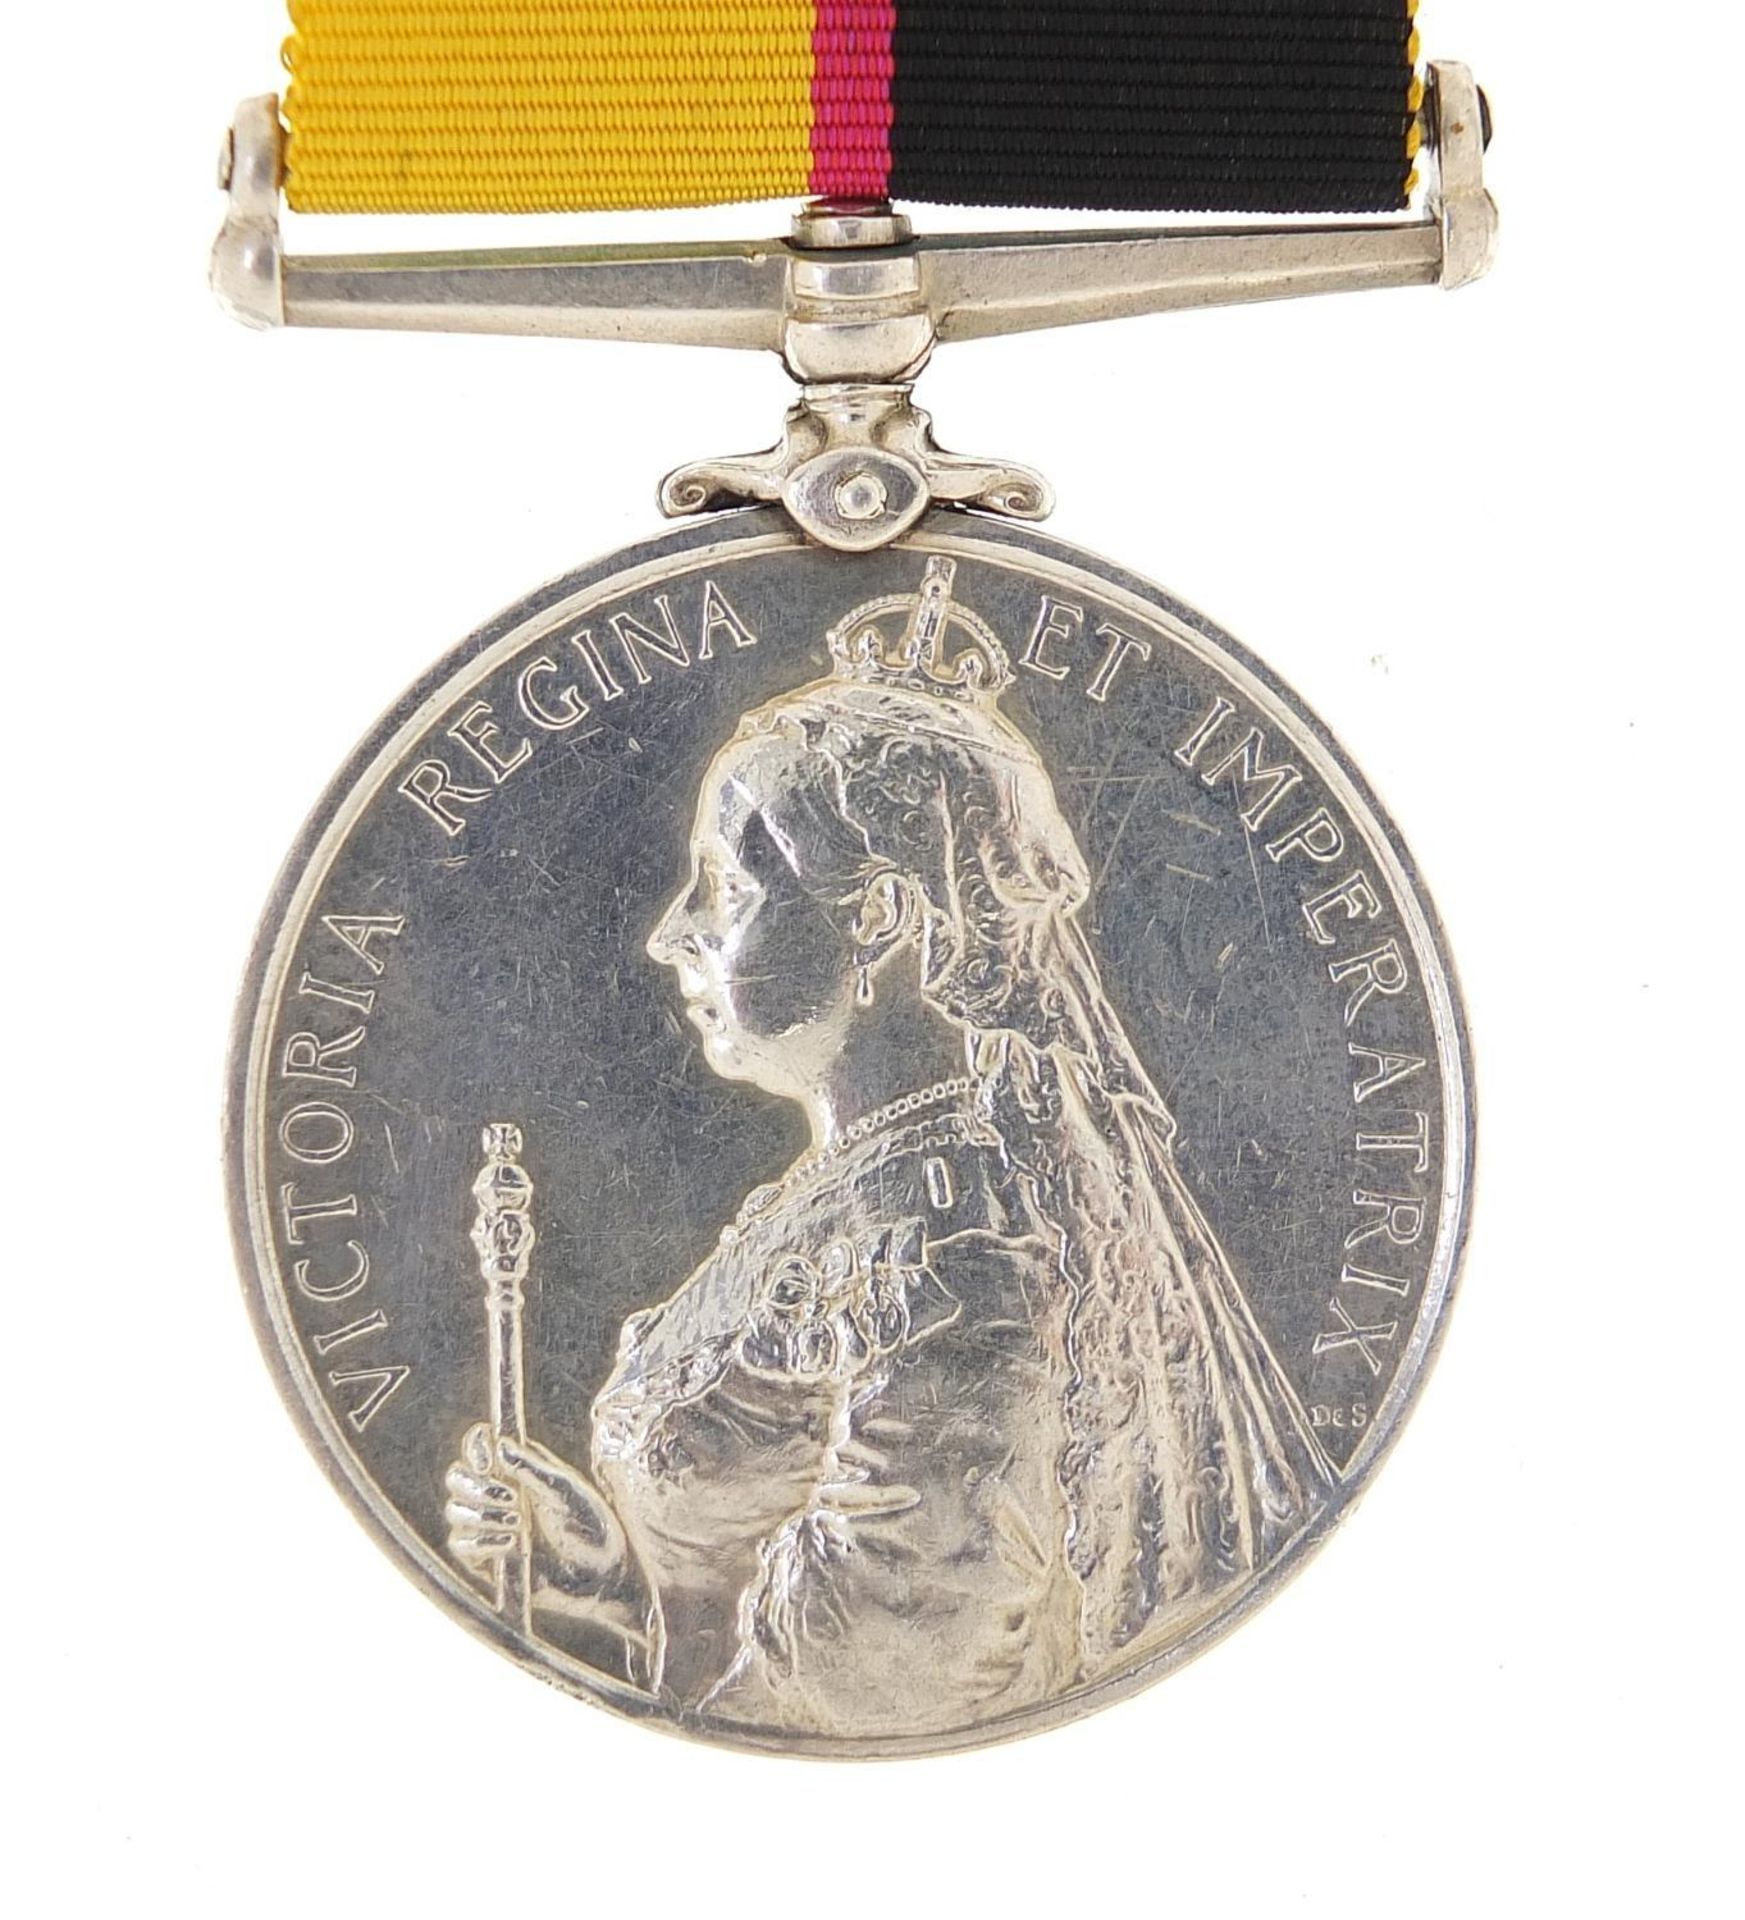 Victorian British military Sudan medal awarded to 3790.PTE.KENNEDY.2/LAN:FUS: - Image 2 of 4